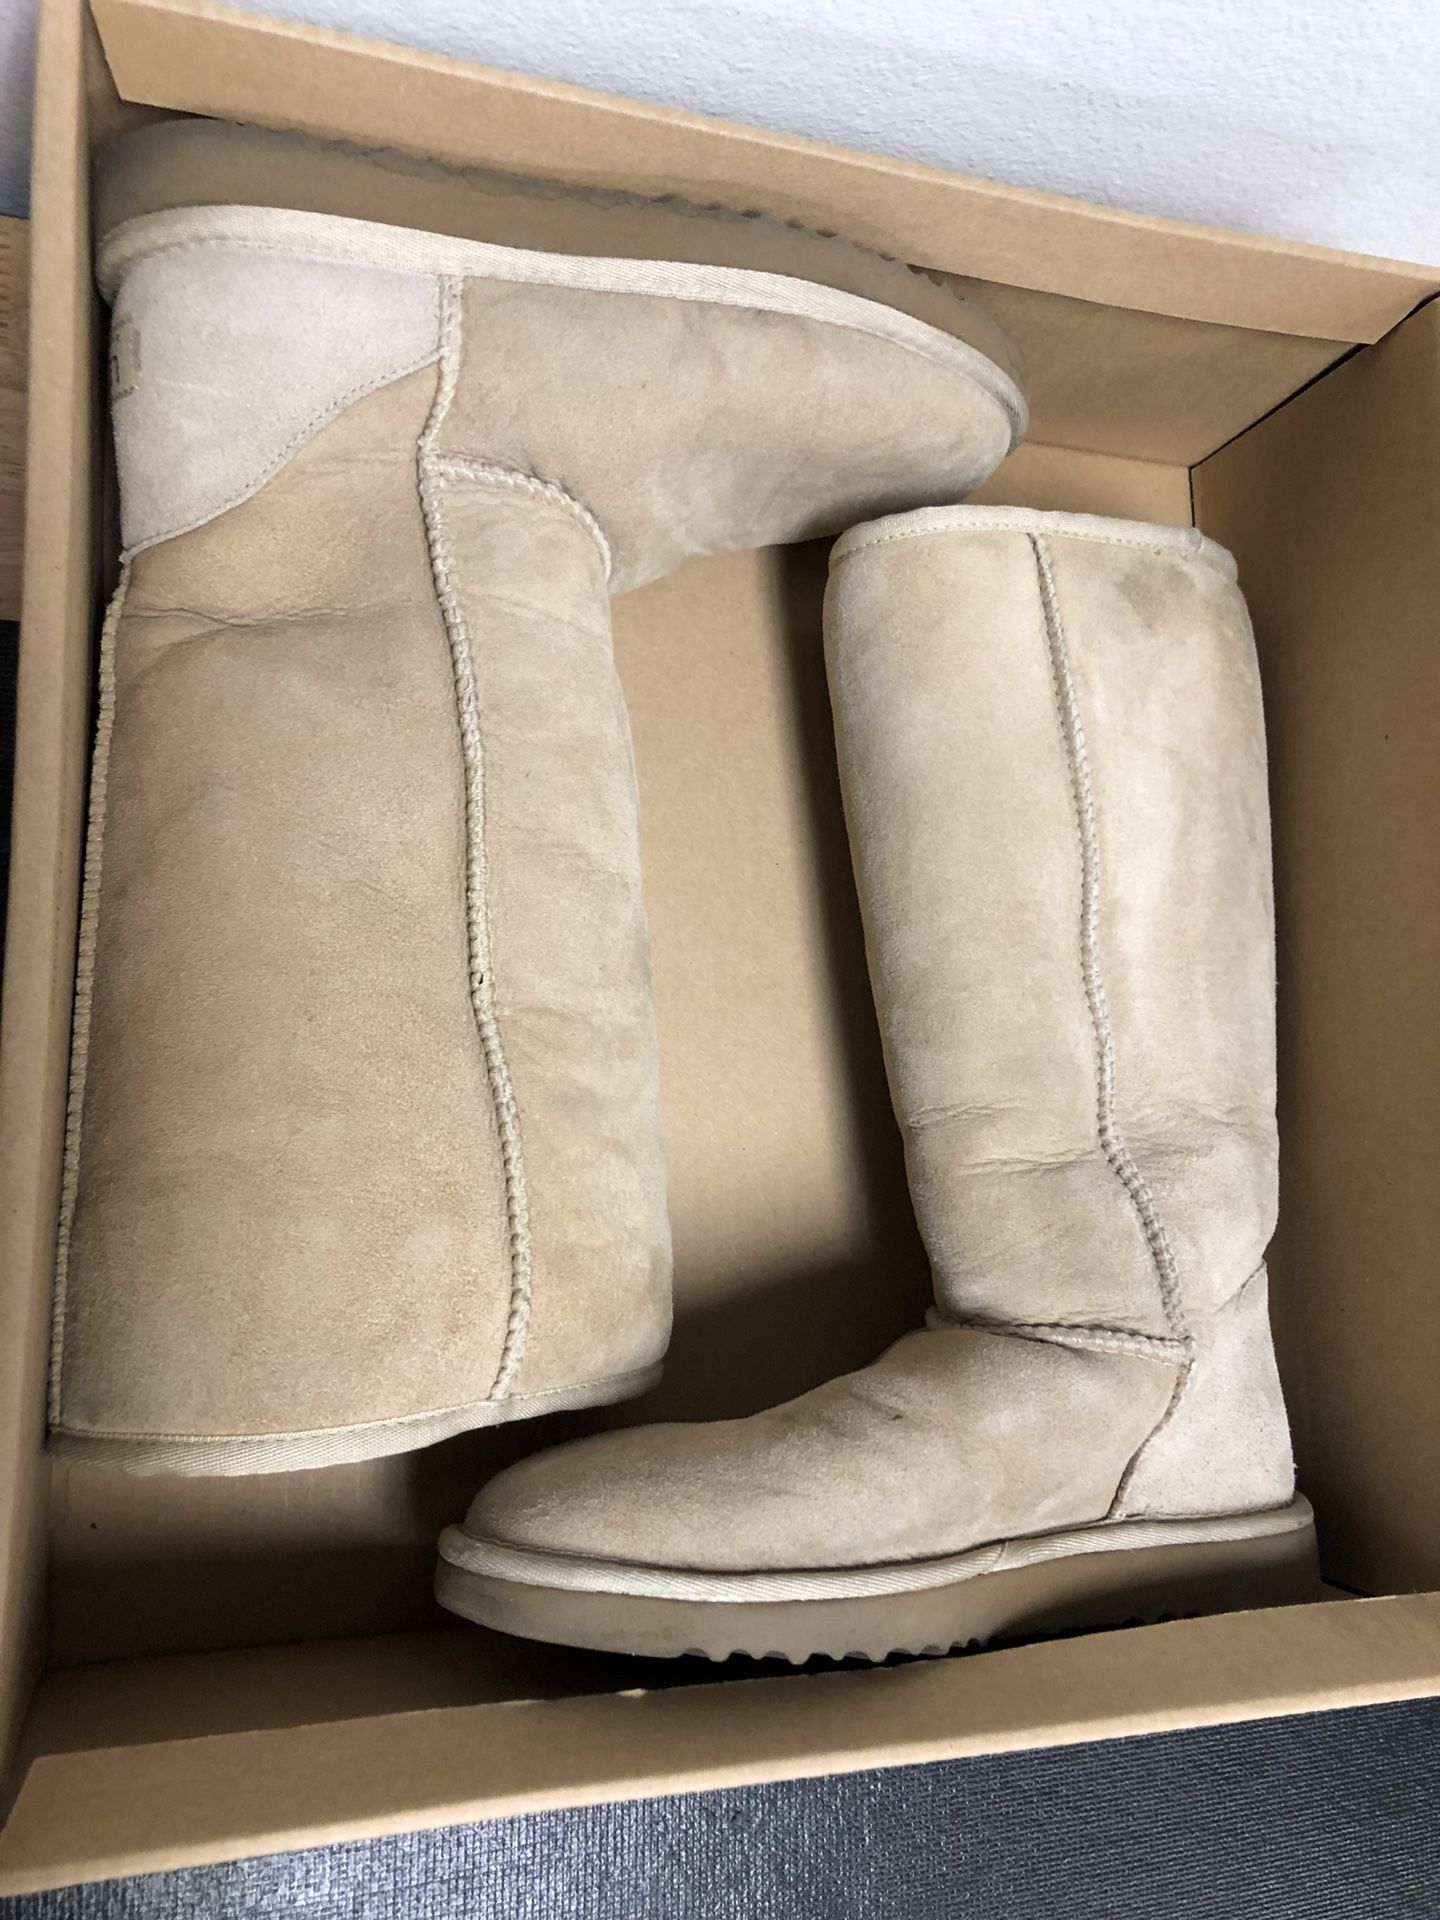 Ugg Classic Tall Boot Sand Color Size 7